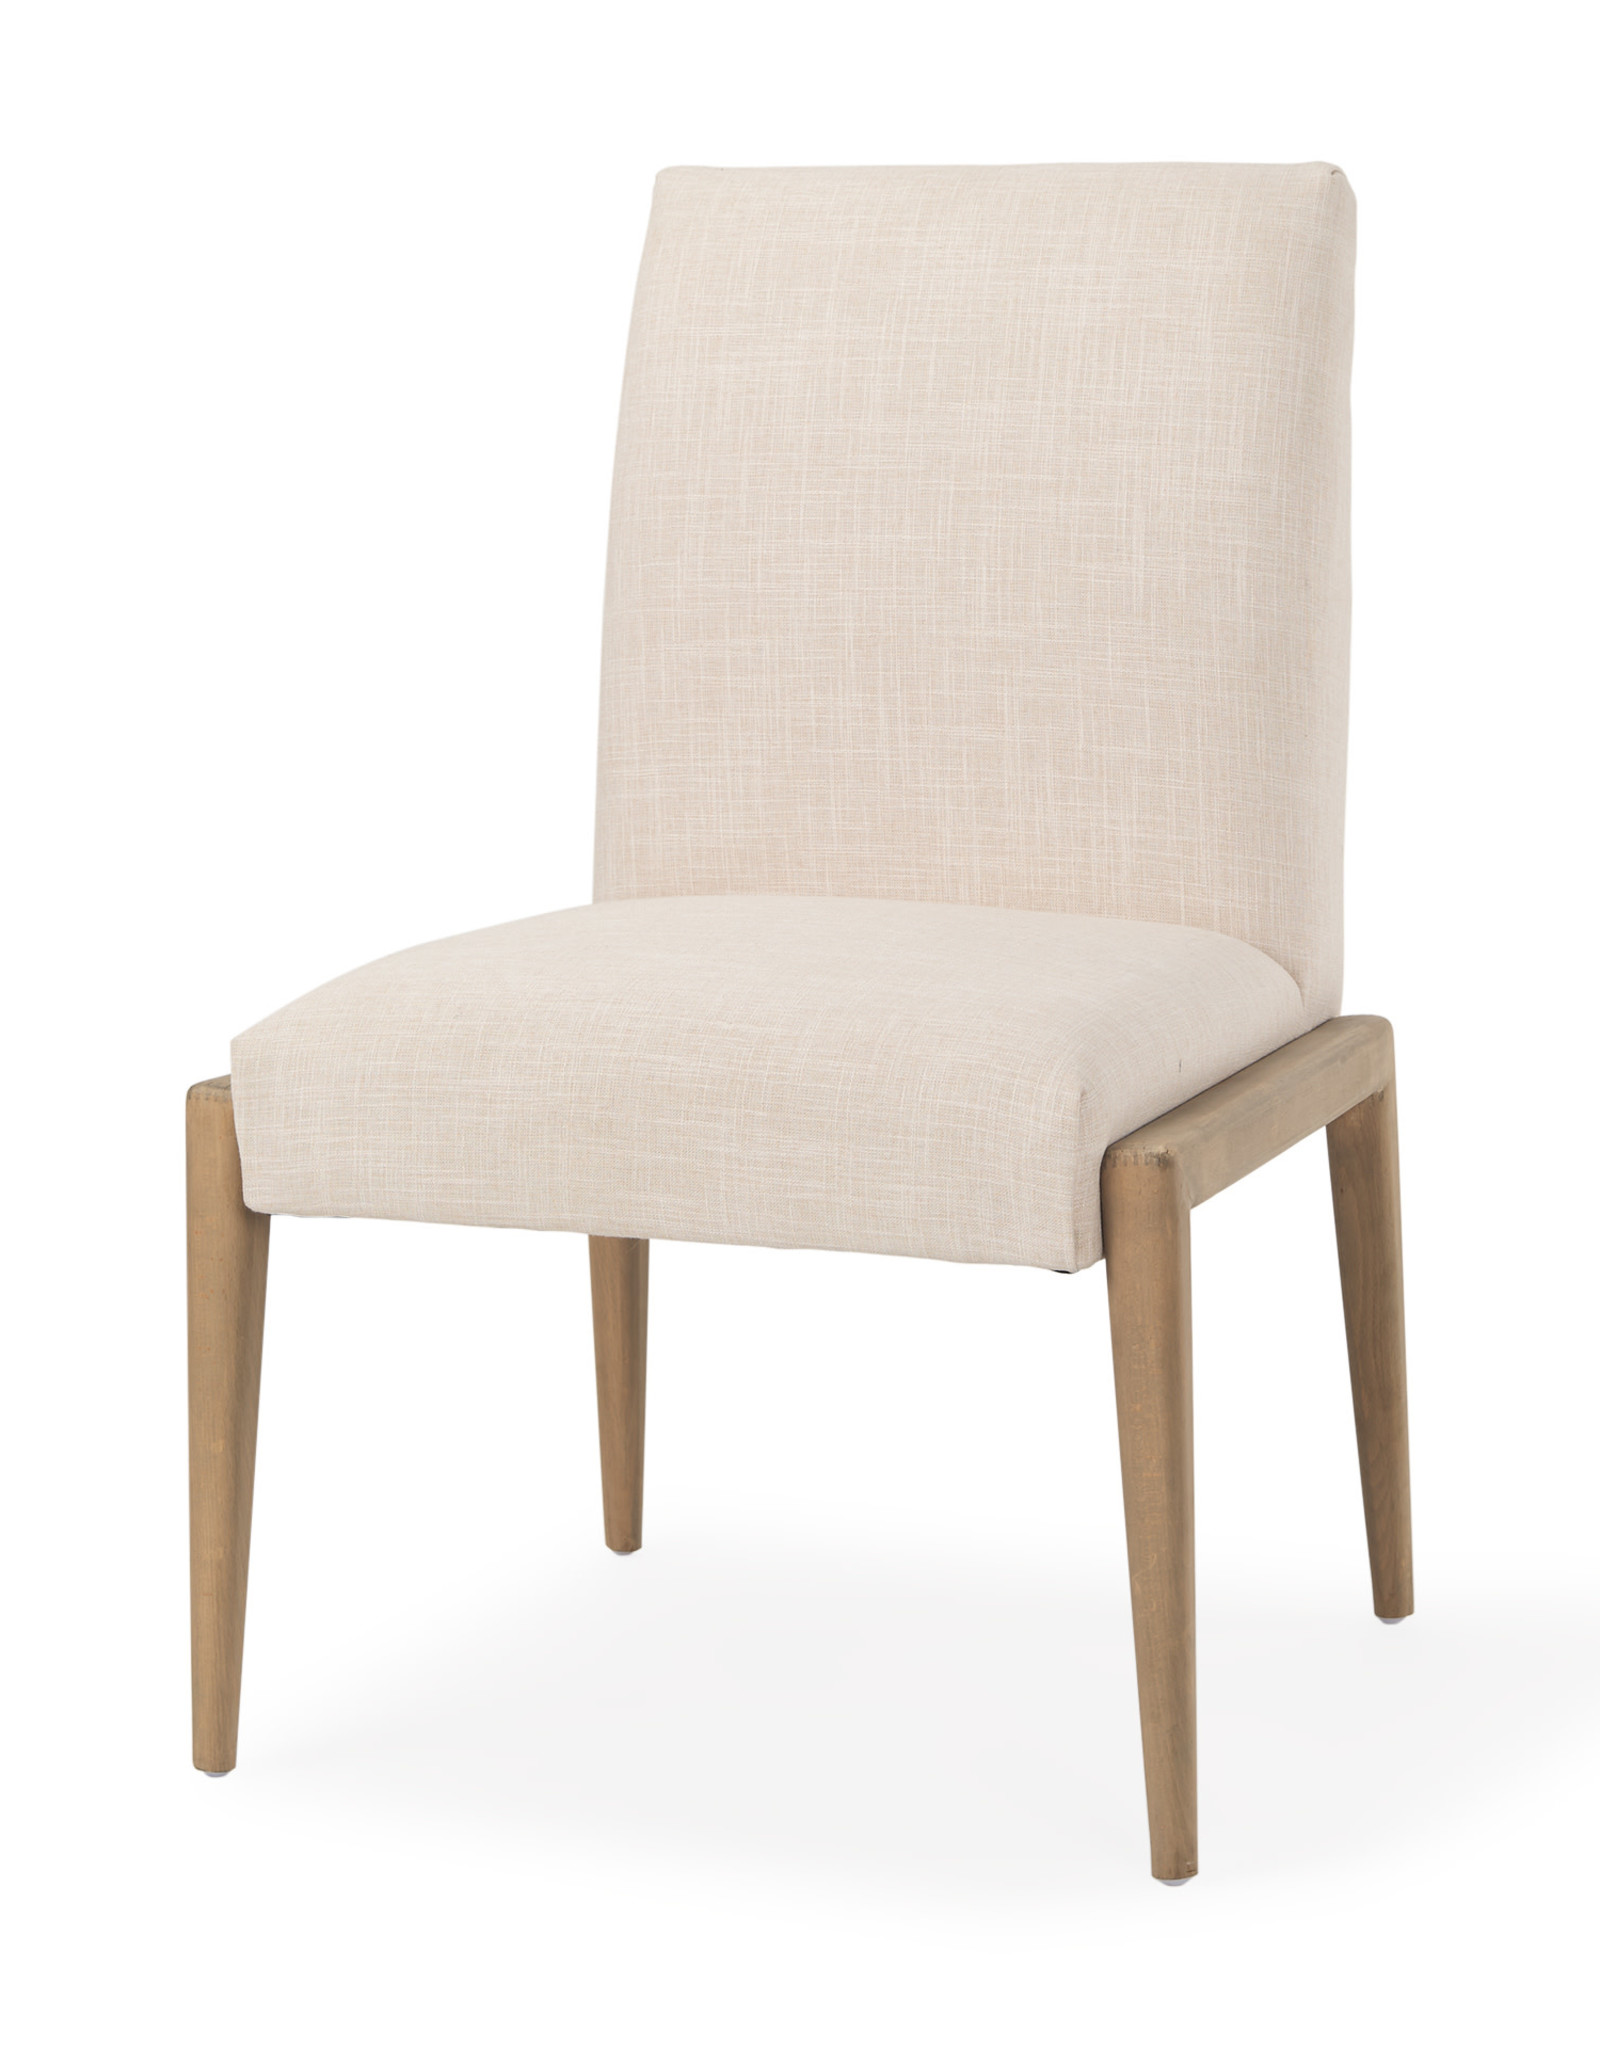 Palisades Dining Chair, Armless